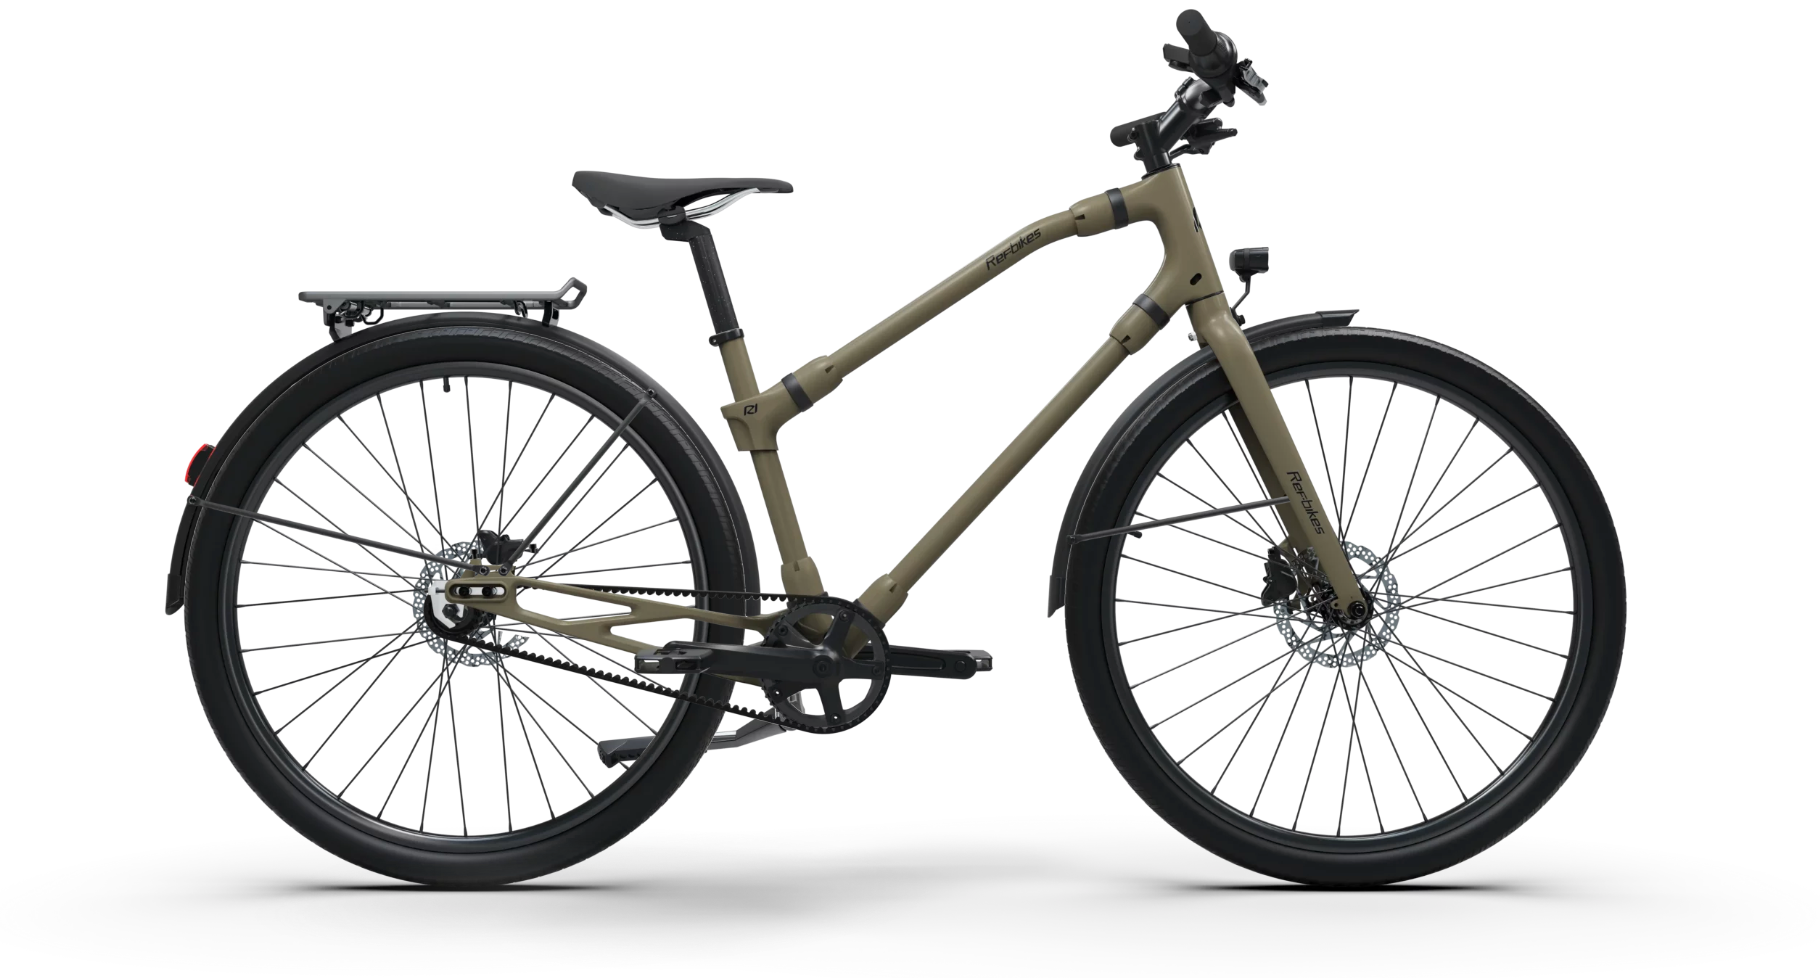 Ref Urban bike in matte sand color with durable tires and modern design.